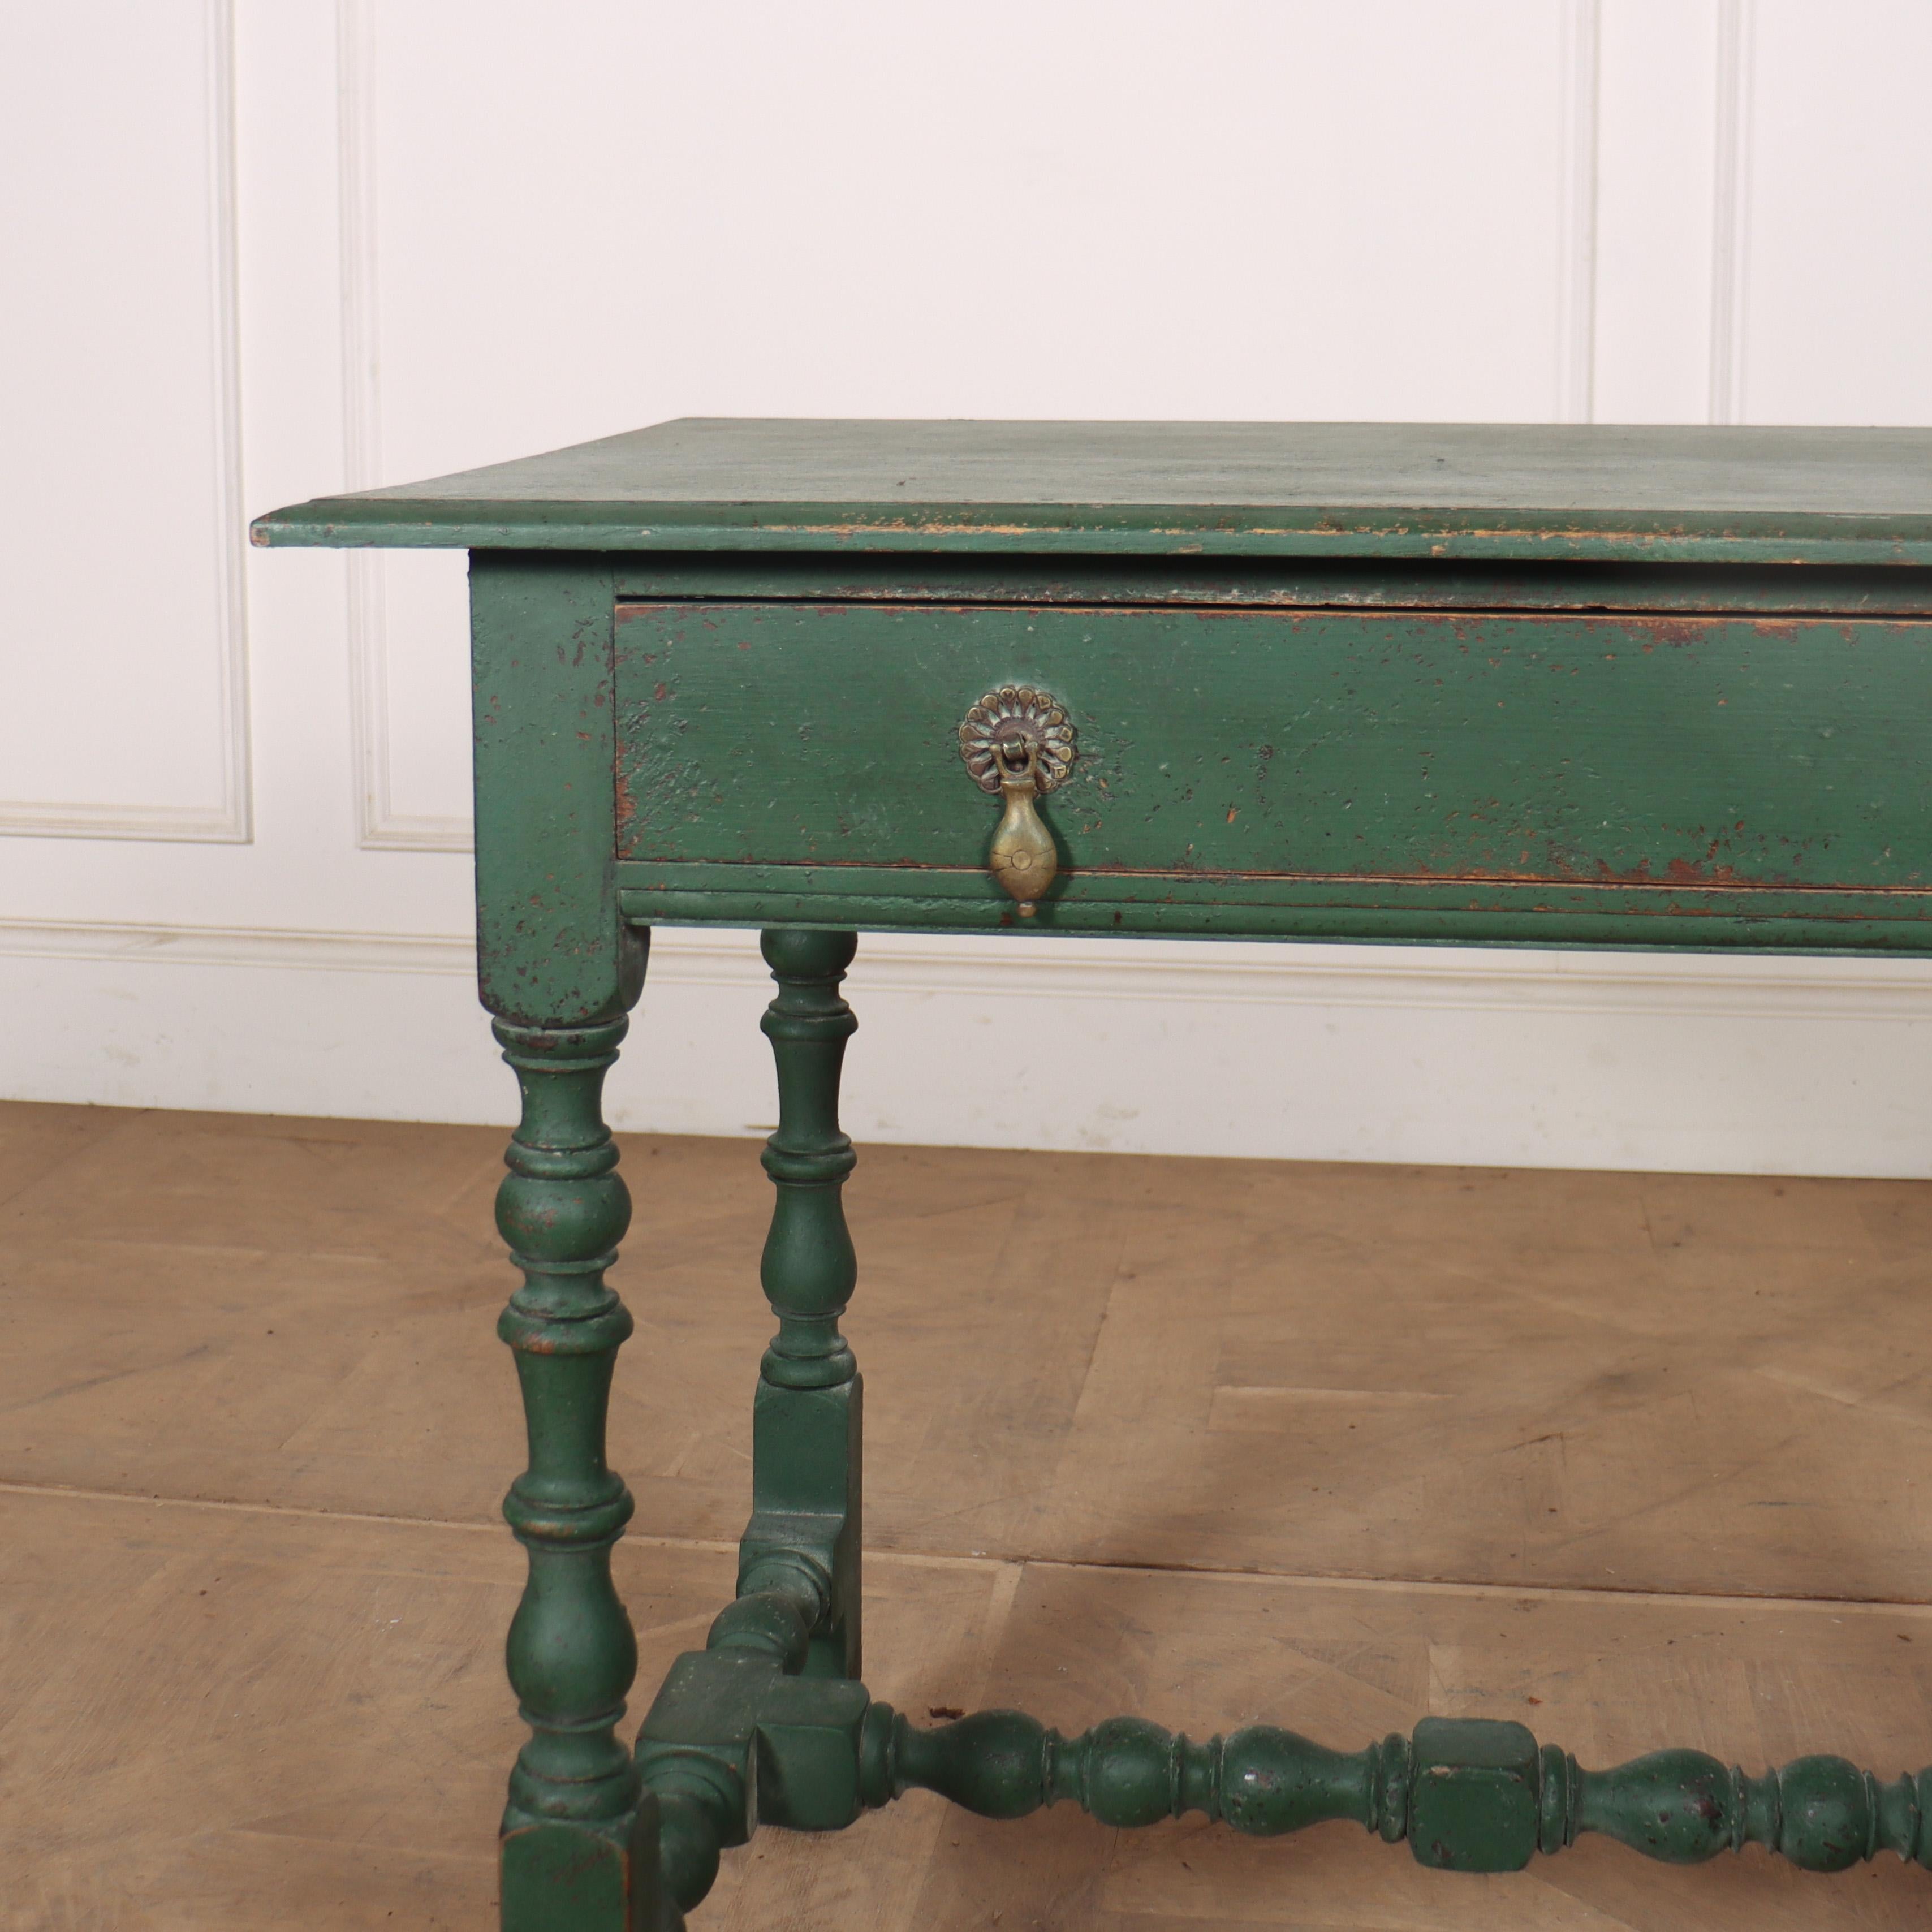 18th C English painted oak one drawer lamp table. 1750.

Reference: 8235

Dimensions
32 inches (81 cms) Wide
22 inches (56 cms) Deep
27.5 inches (70 cms) High